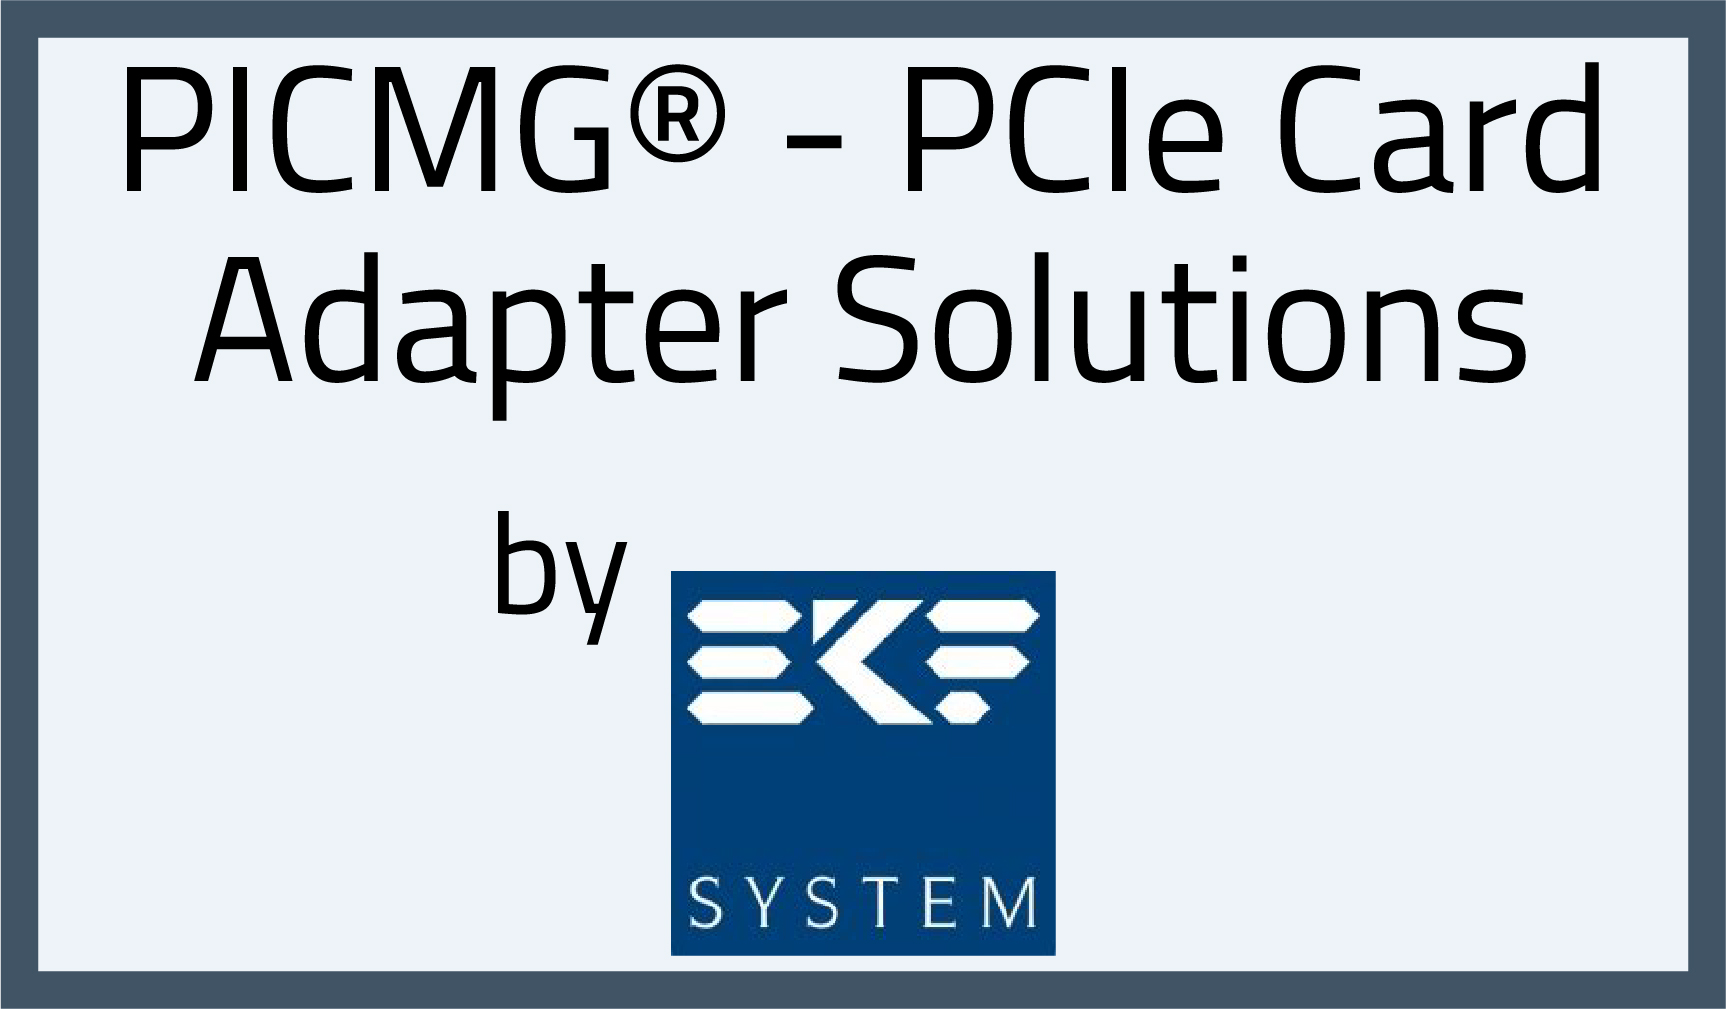 PICMG® – PCIe Card Adapter Solutions